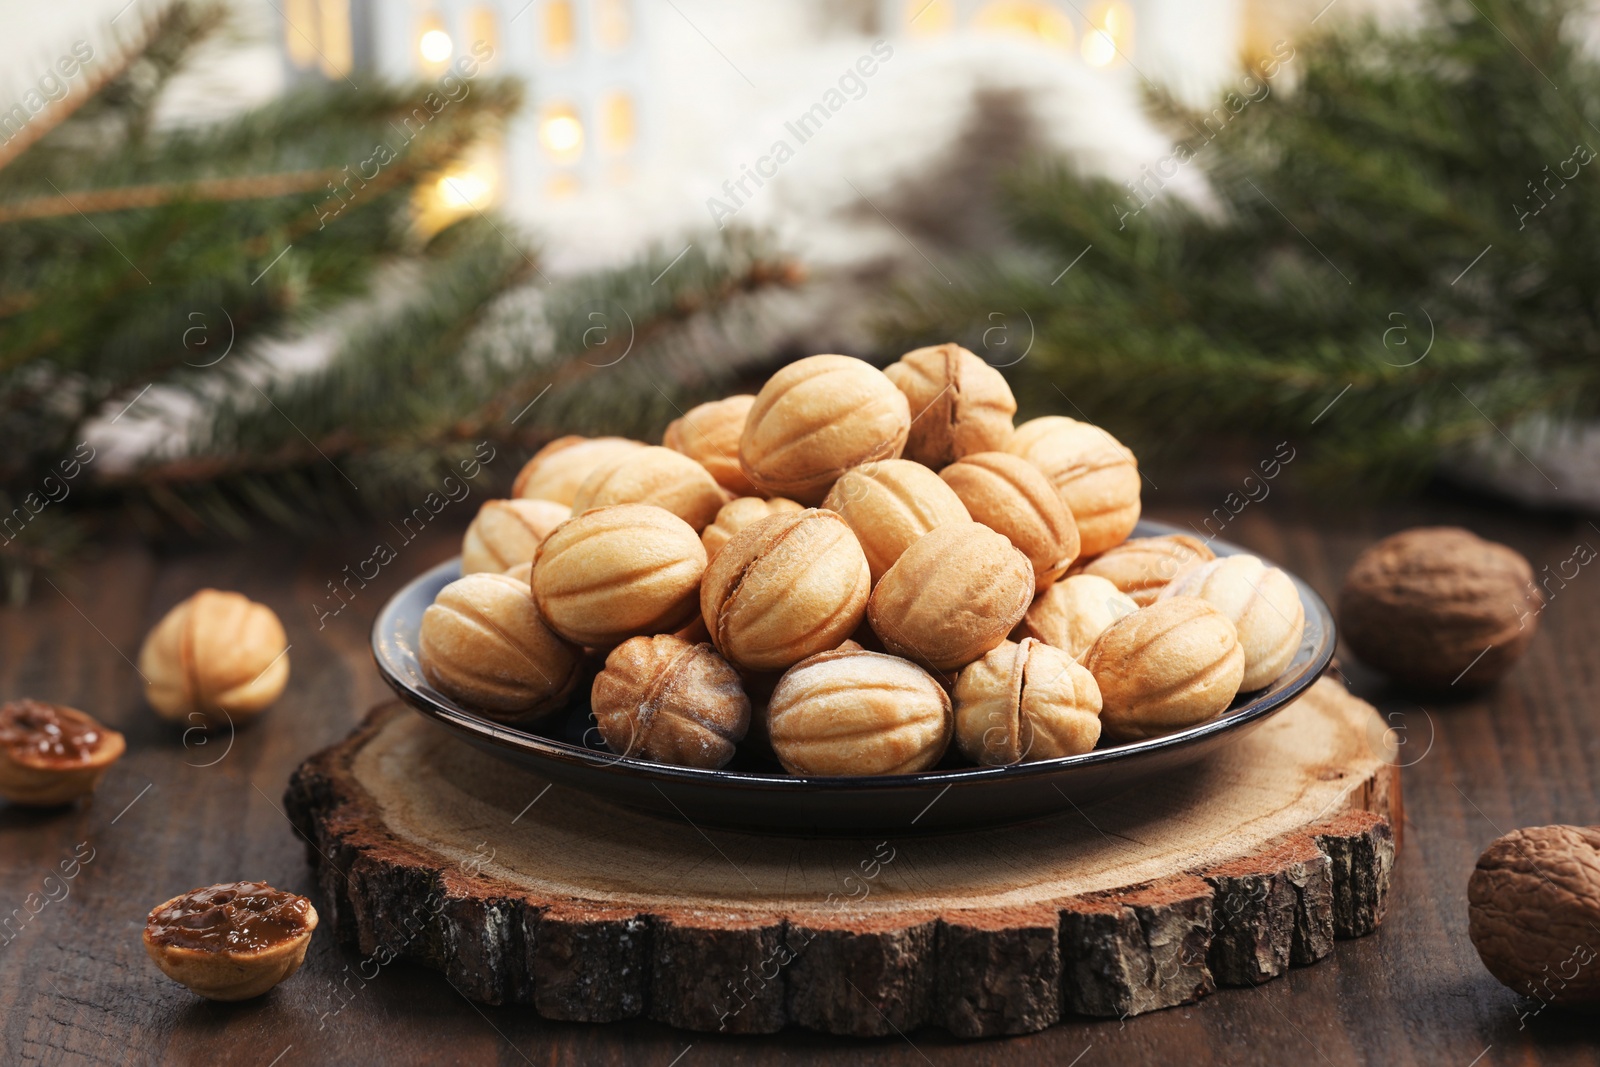 Photo of Homemade walnut shaped cookies with boiled condensed milk near fir branches on wooden table